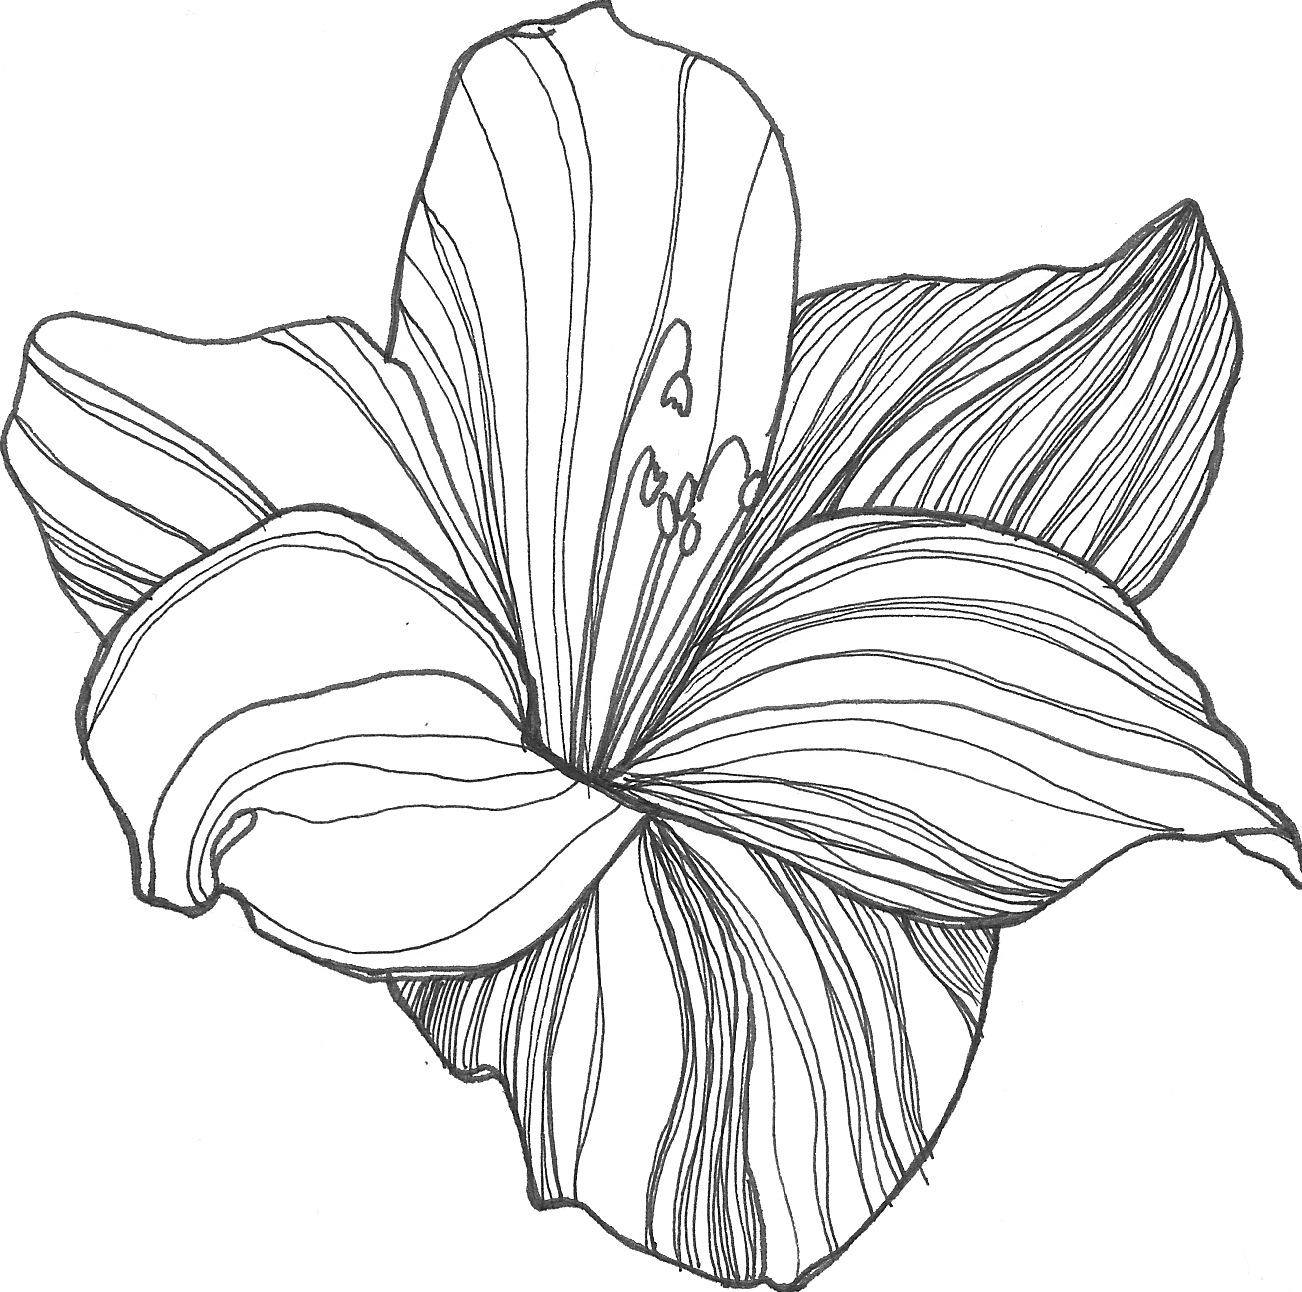 Free Line Drawing Of A Flower Download Free Clip Art Free Clip Art On Clipart Library,Where To Buy Rae Dunn Wholesale